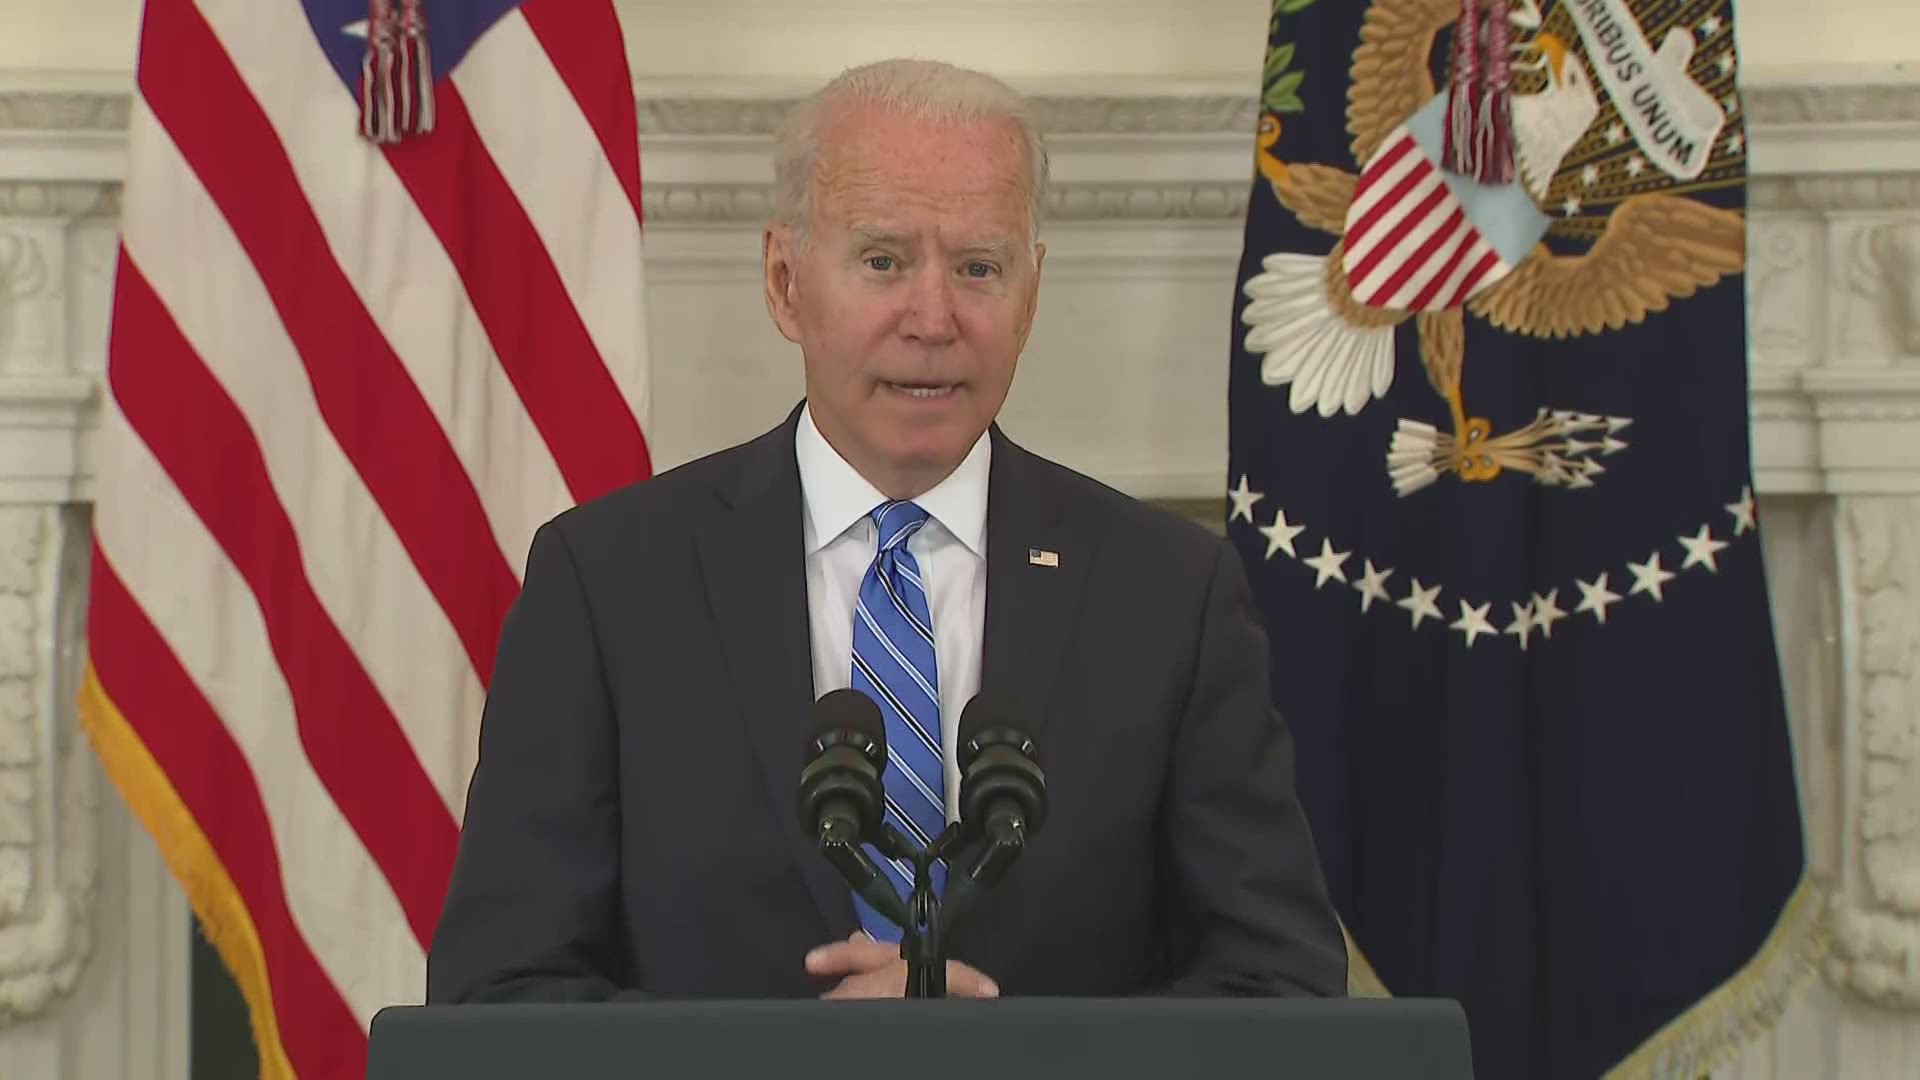 President Joe Biden remarked on massive American job growth Monday, saying the economy is adding more than 600,000 jobs per month.